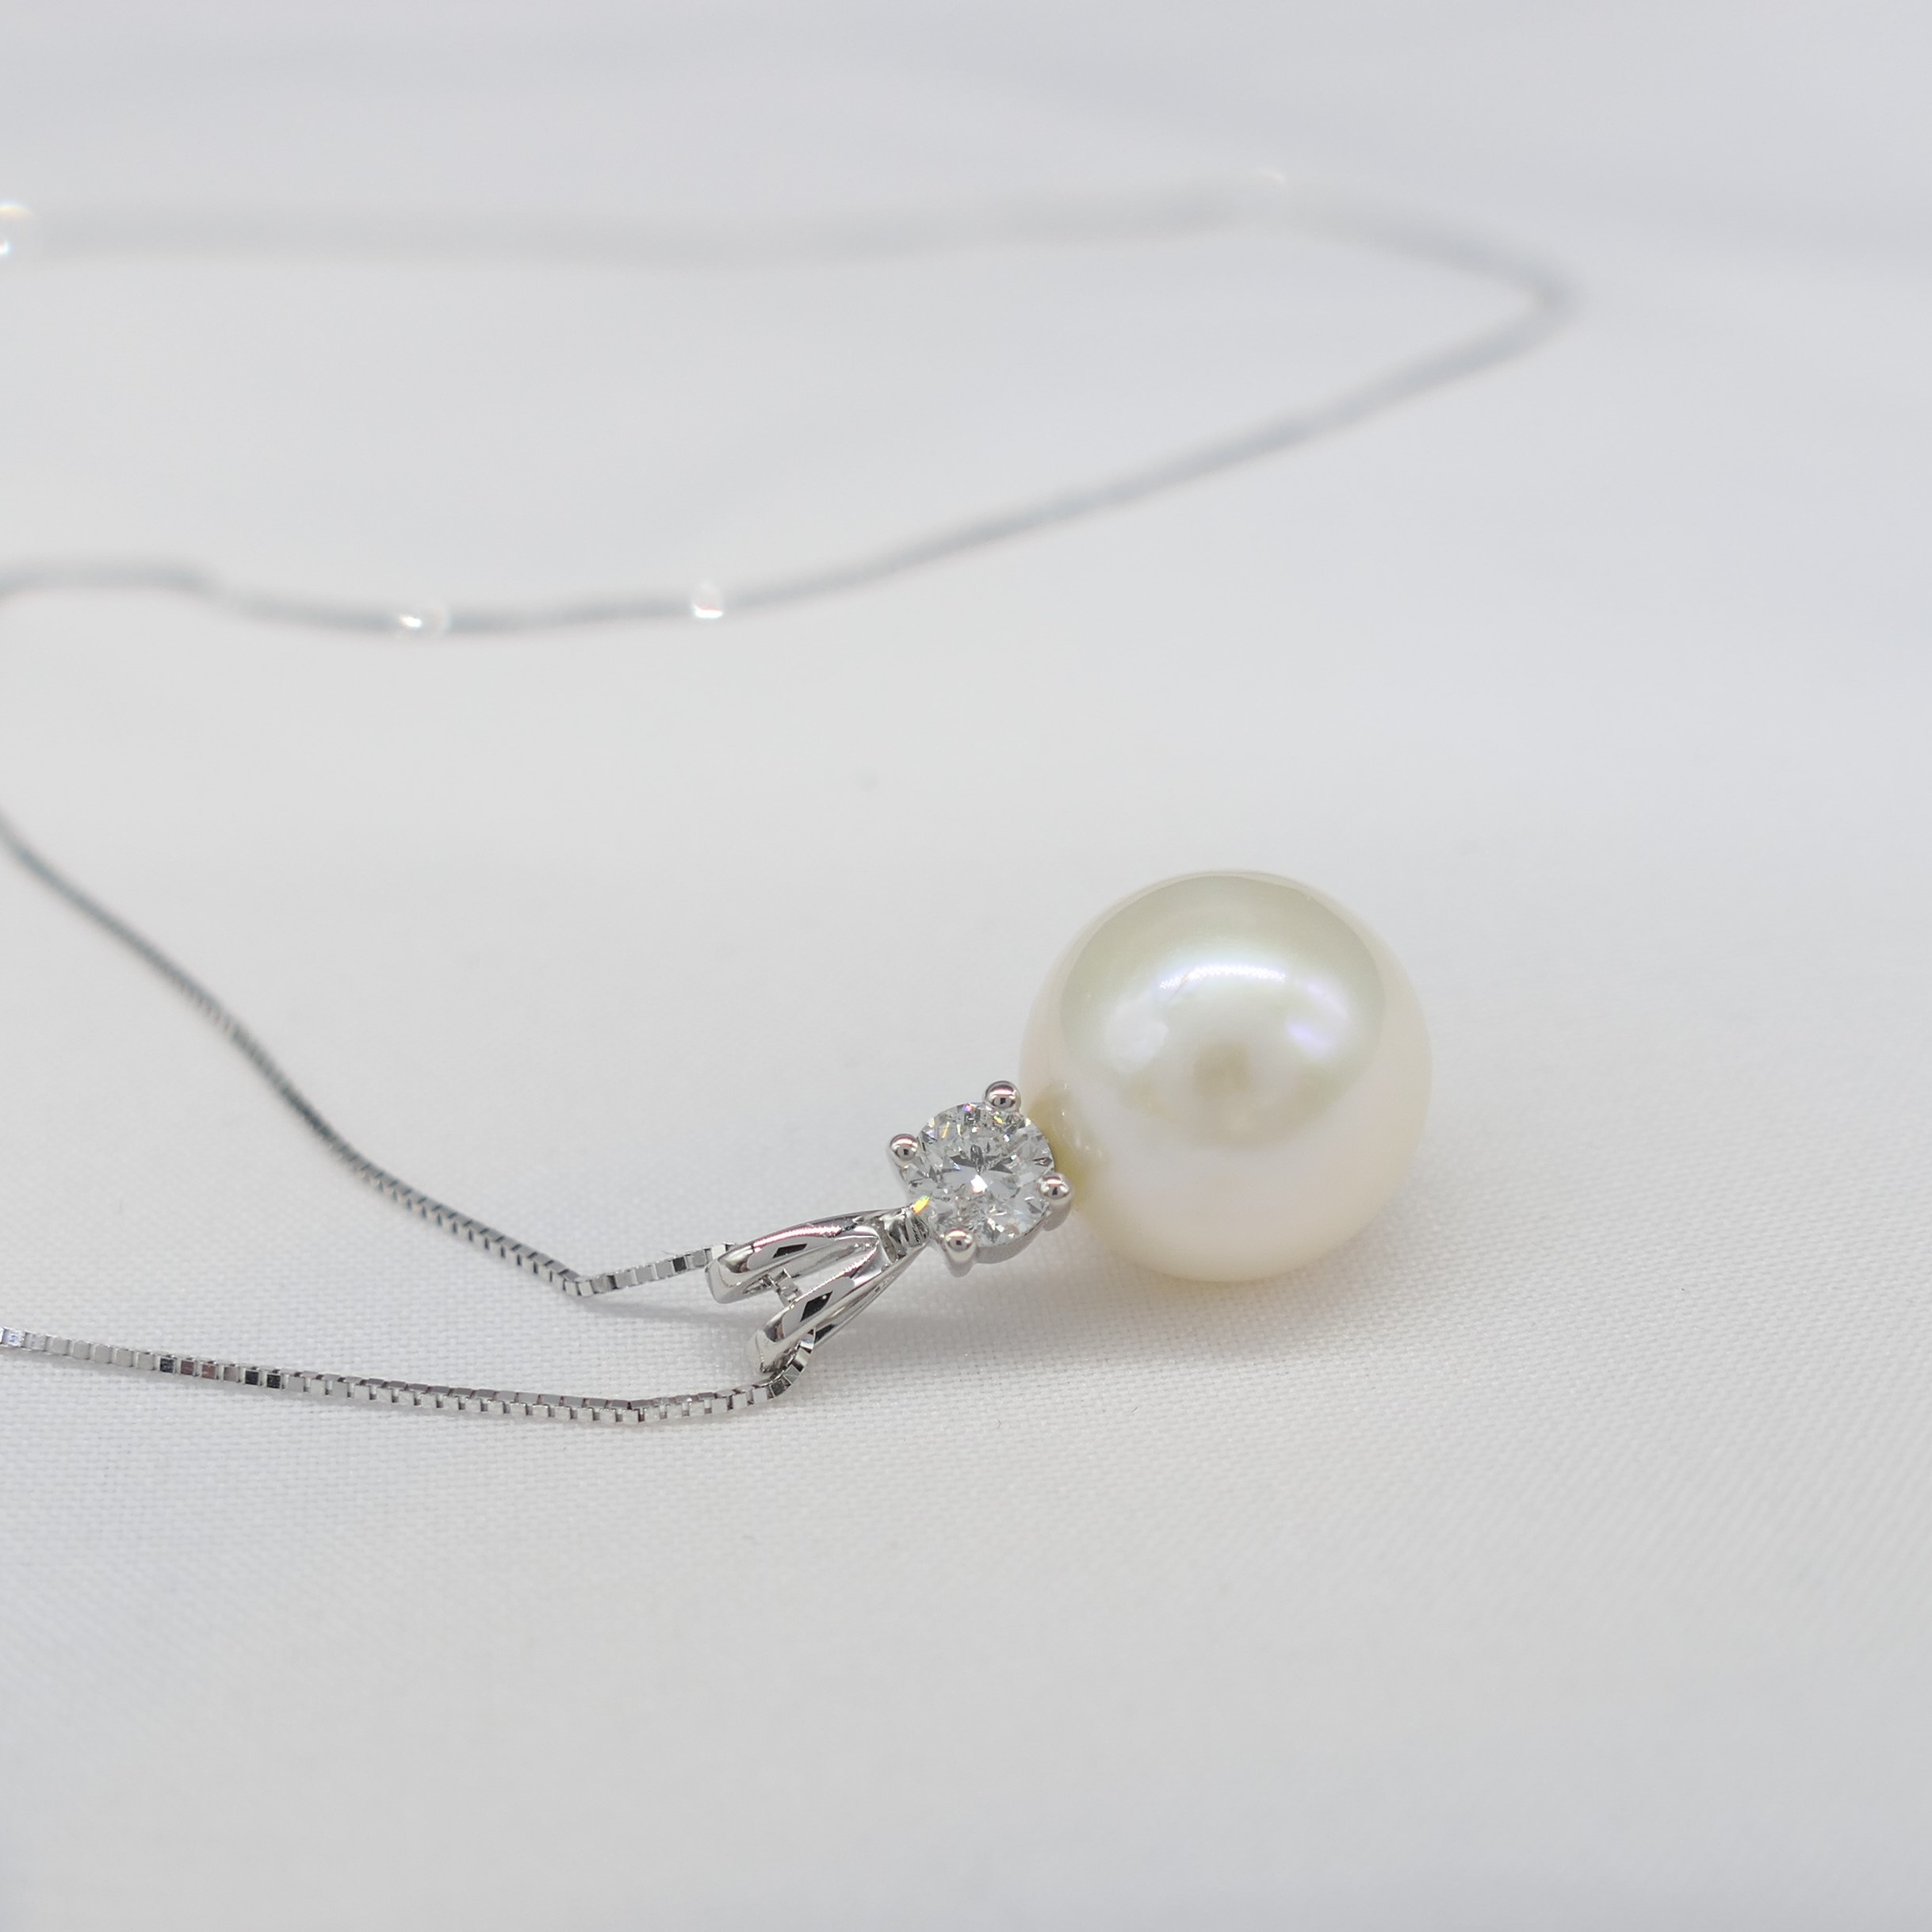 White Gold Freshwater Pearl and Diamond Necklace - Image 2 of 6